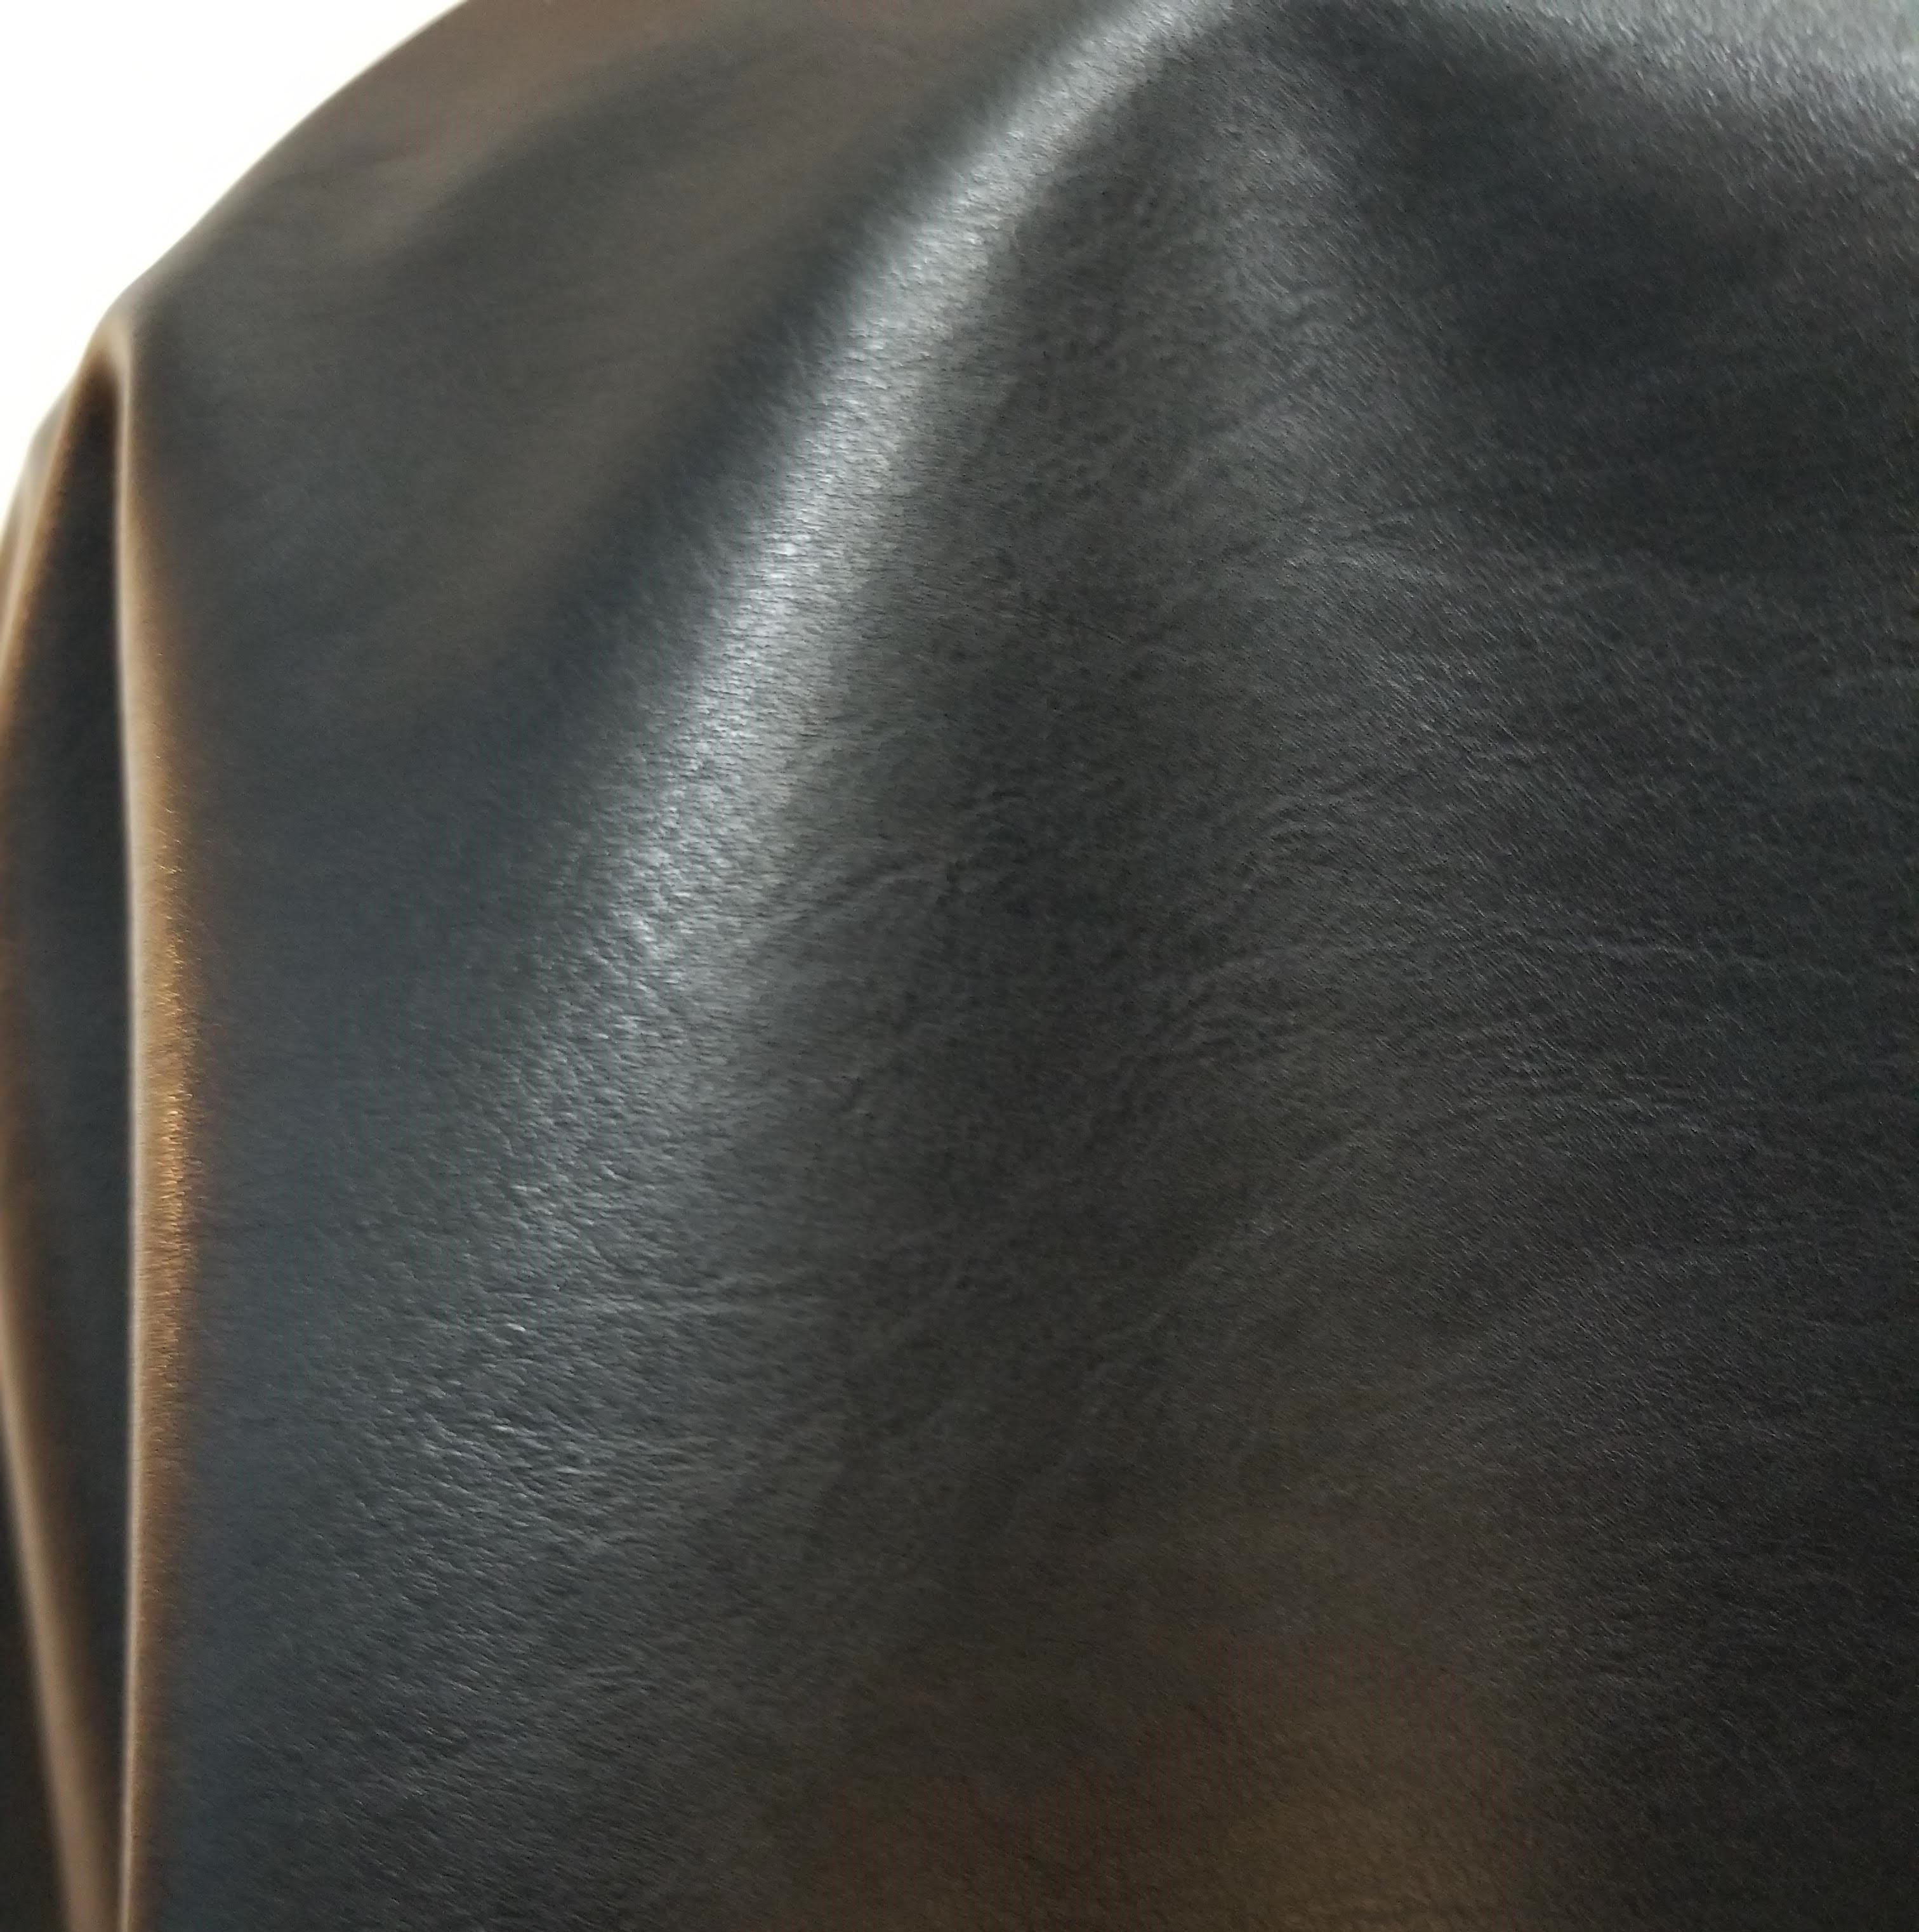 Black Matte Fullgrain Look Faux Vegan {Peta Approved} Leather Synthetic Pleather 0.9 mm 1 Yard 52 inch Wide x 36 inch Long Soft Smooth Vinyl Upholstery Black Matte 